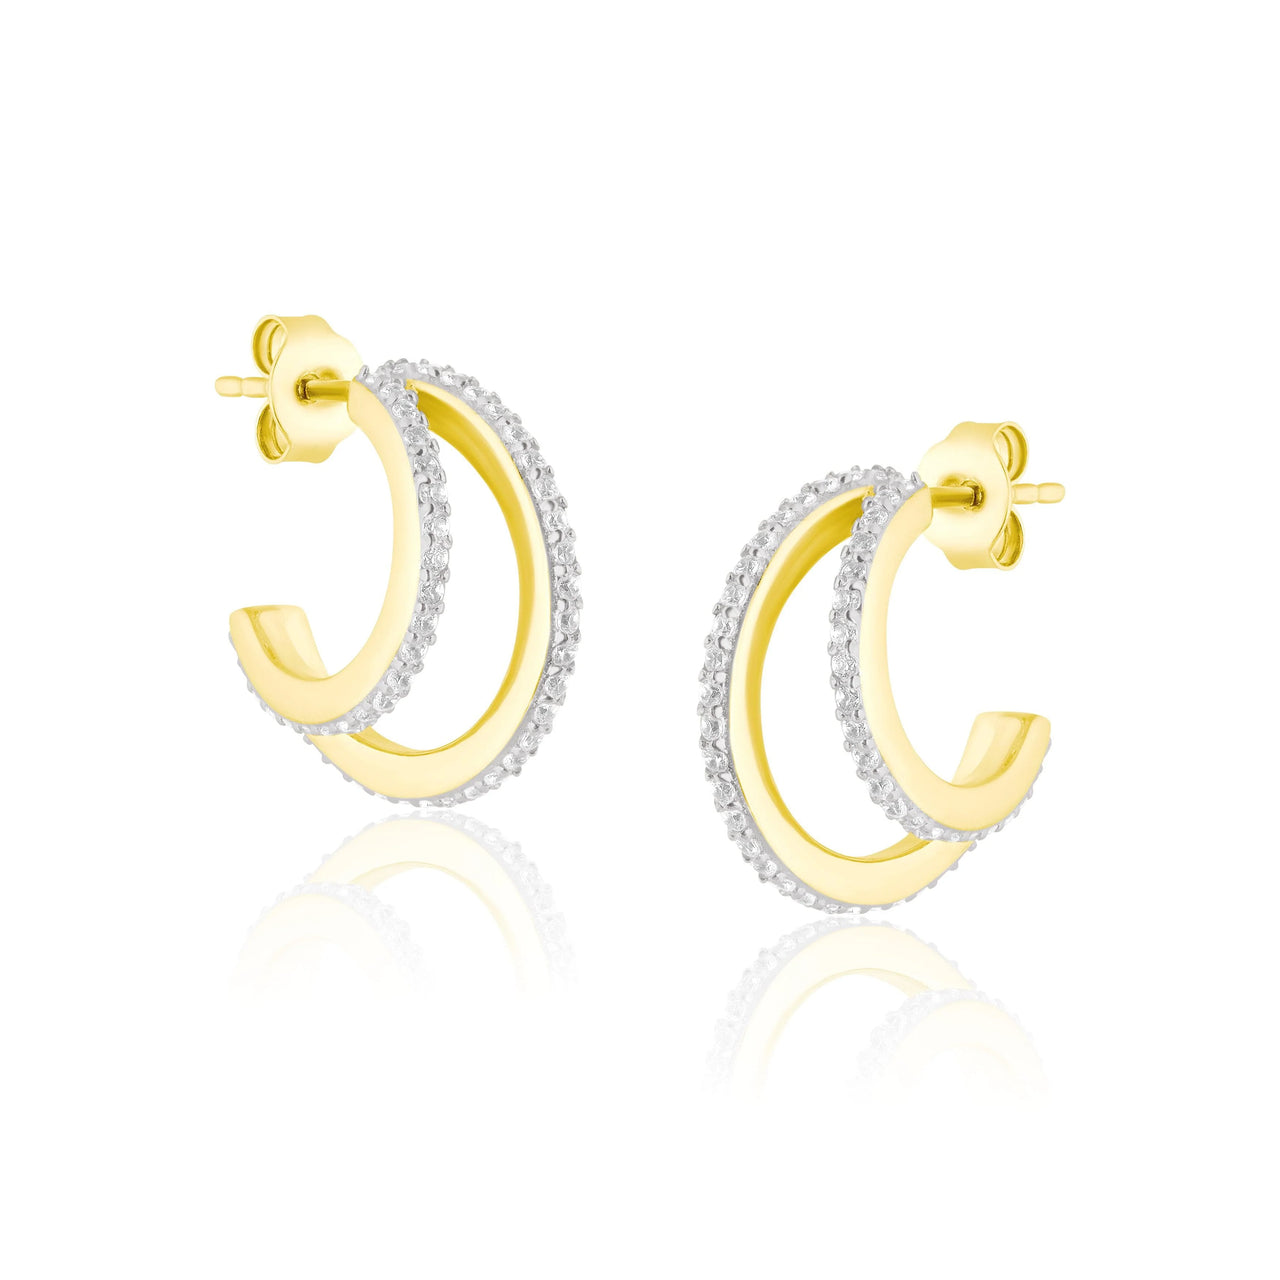 DOUBLE PAVE HOOPS